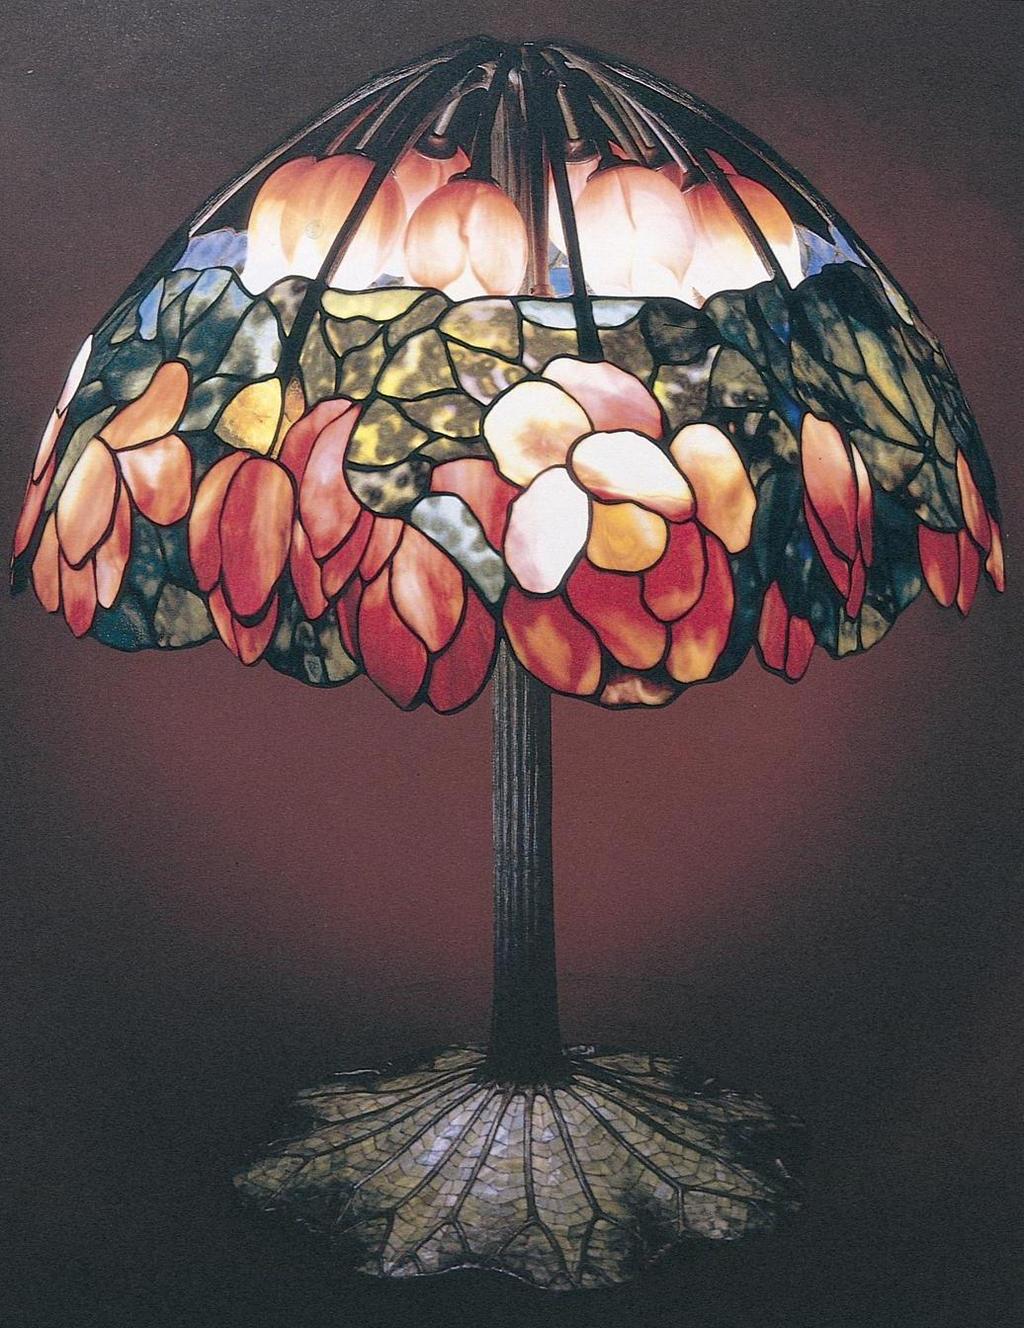 Louis Comfort Tiffany Lotus table lamp (1905-1910) Tiffany was an American artist and designer well known for his large stained glass windows and his handcrafted lamps.